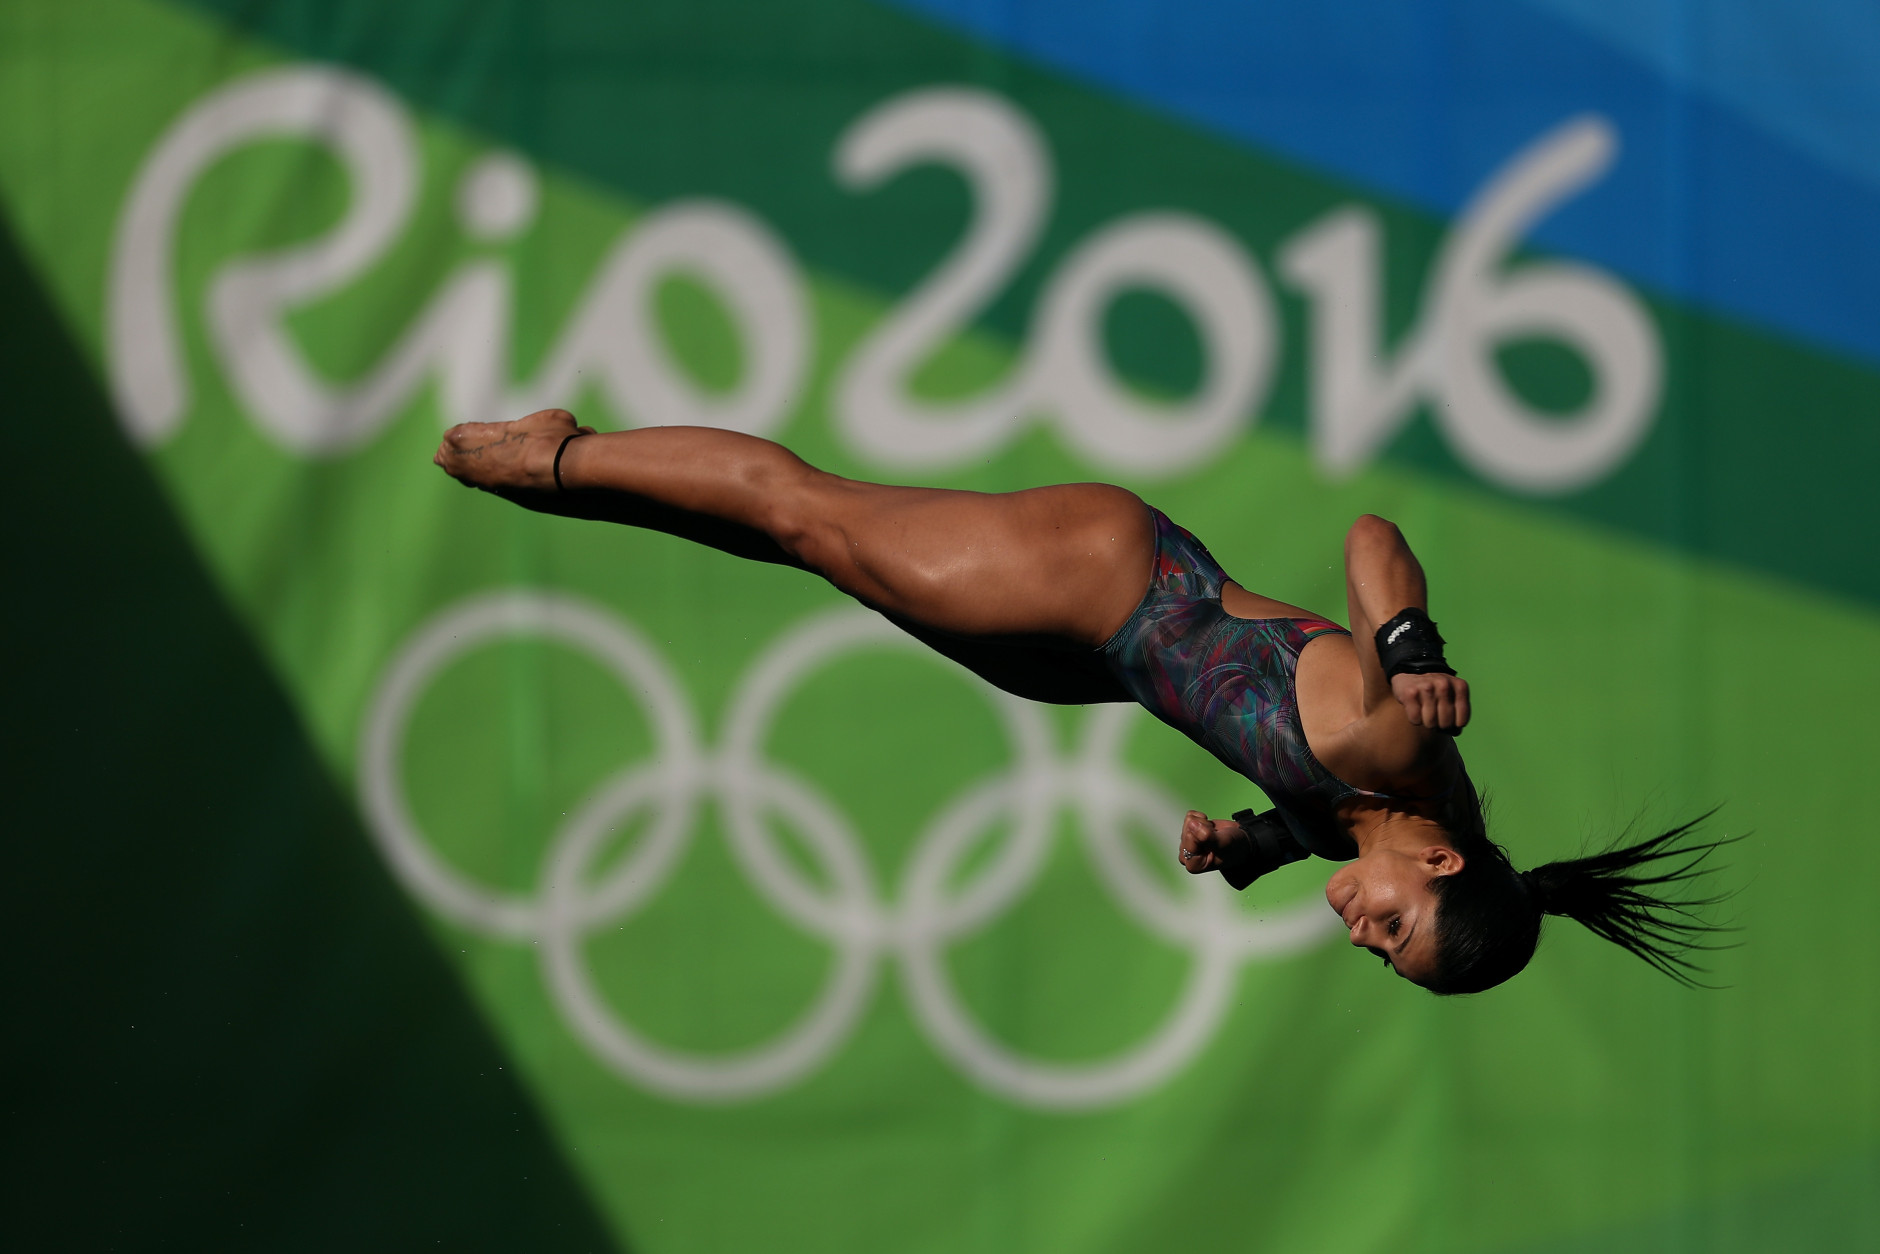 RIO DE JANEIRO, BRAZIL - AUGUST 17:  Ingrid Oliveira of Brazil competes during the Women's 10m Platform Diving preliminaries on Day 12 of the Rio 2016 Olympic Games at Maria Lenk Aquatics Centre on August 17, 2016 in Rio de Janeiro, Brazil.  (Photo by Al Bello/Getty Images)